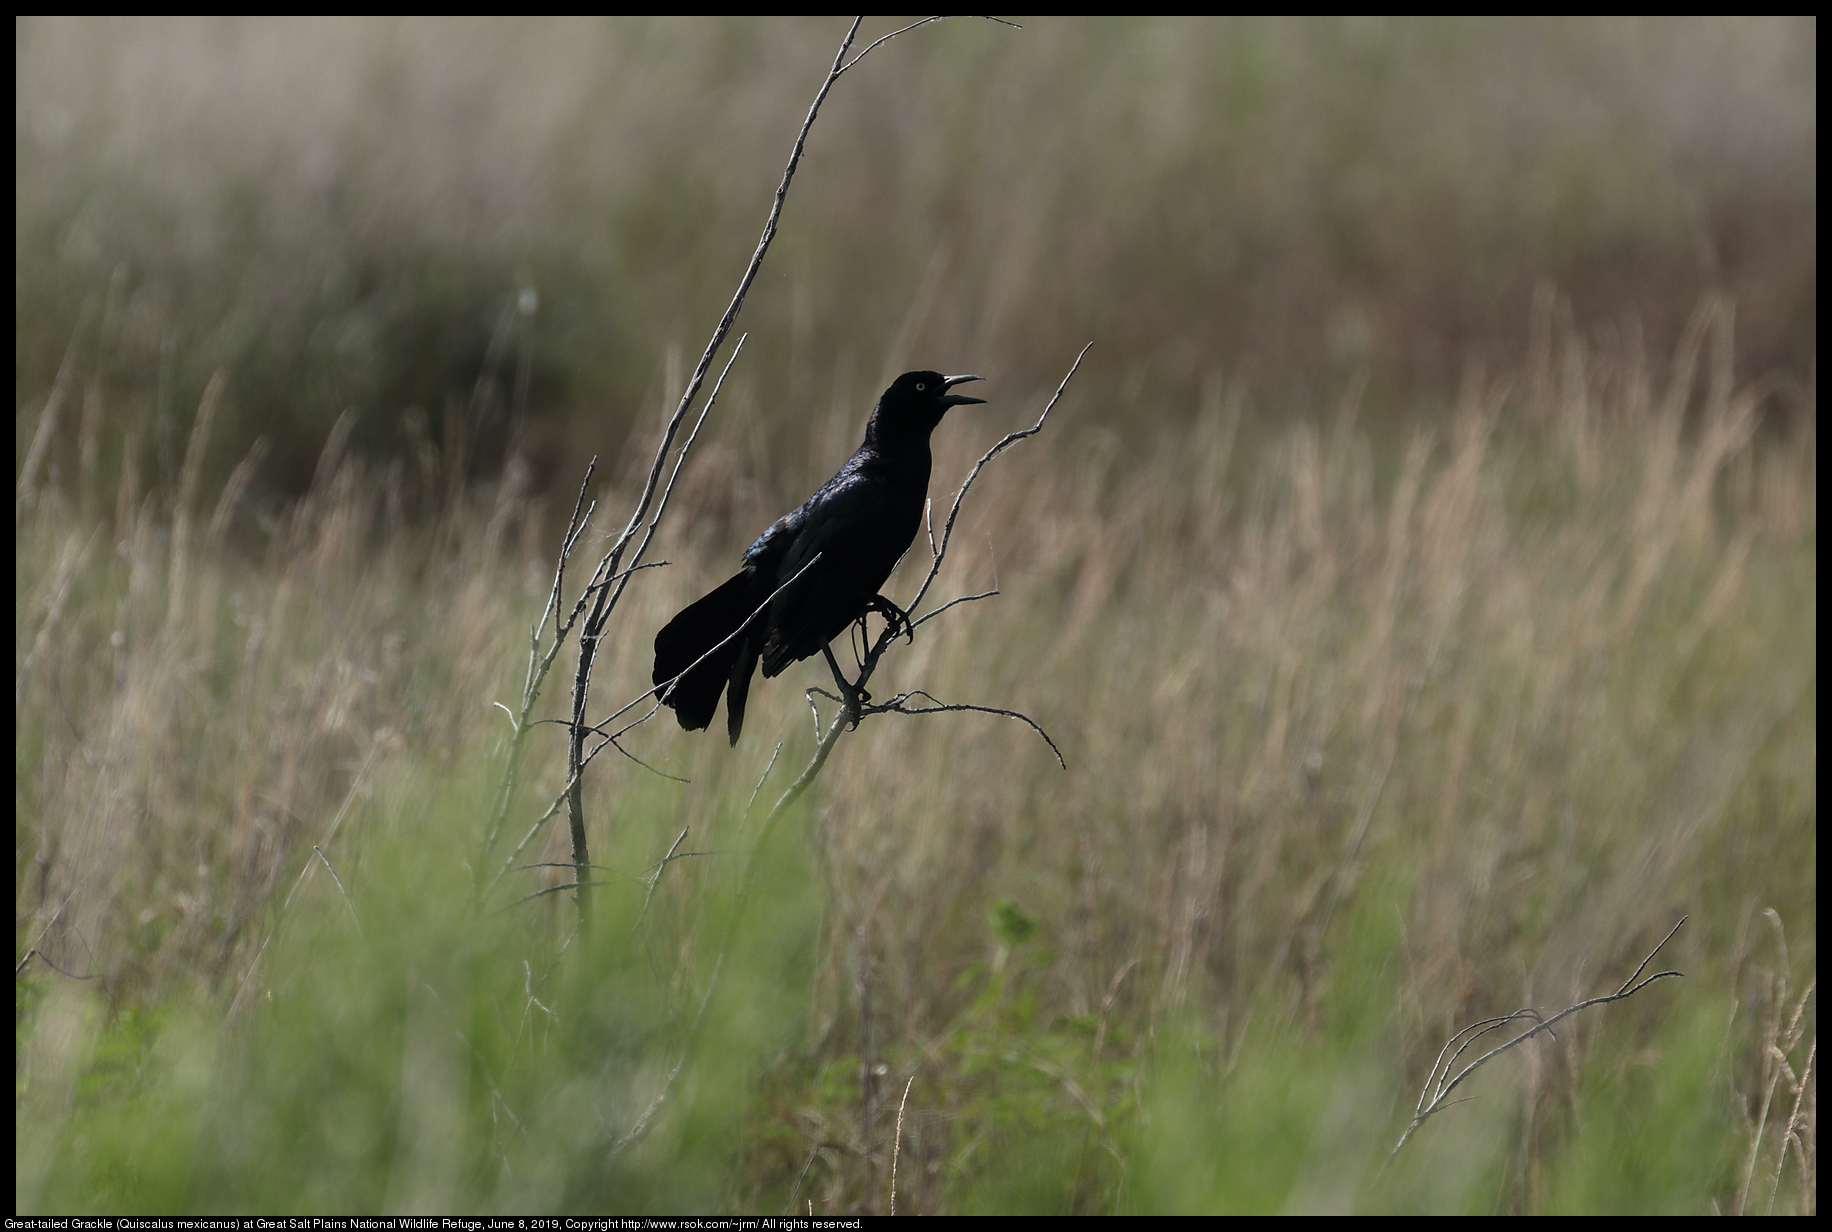 Great-tailed Grackle (Quiscalus mexicanus) at Great Salt Plains National Wildlife Refuge, June 8, 2019